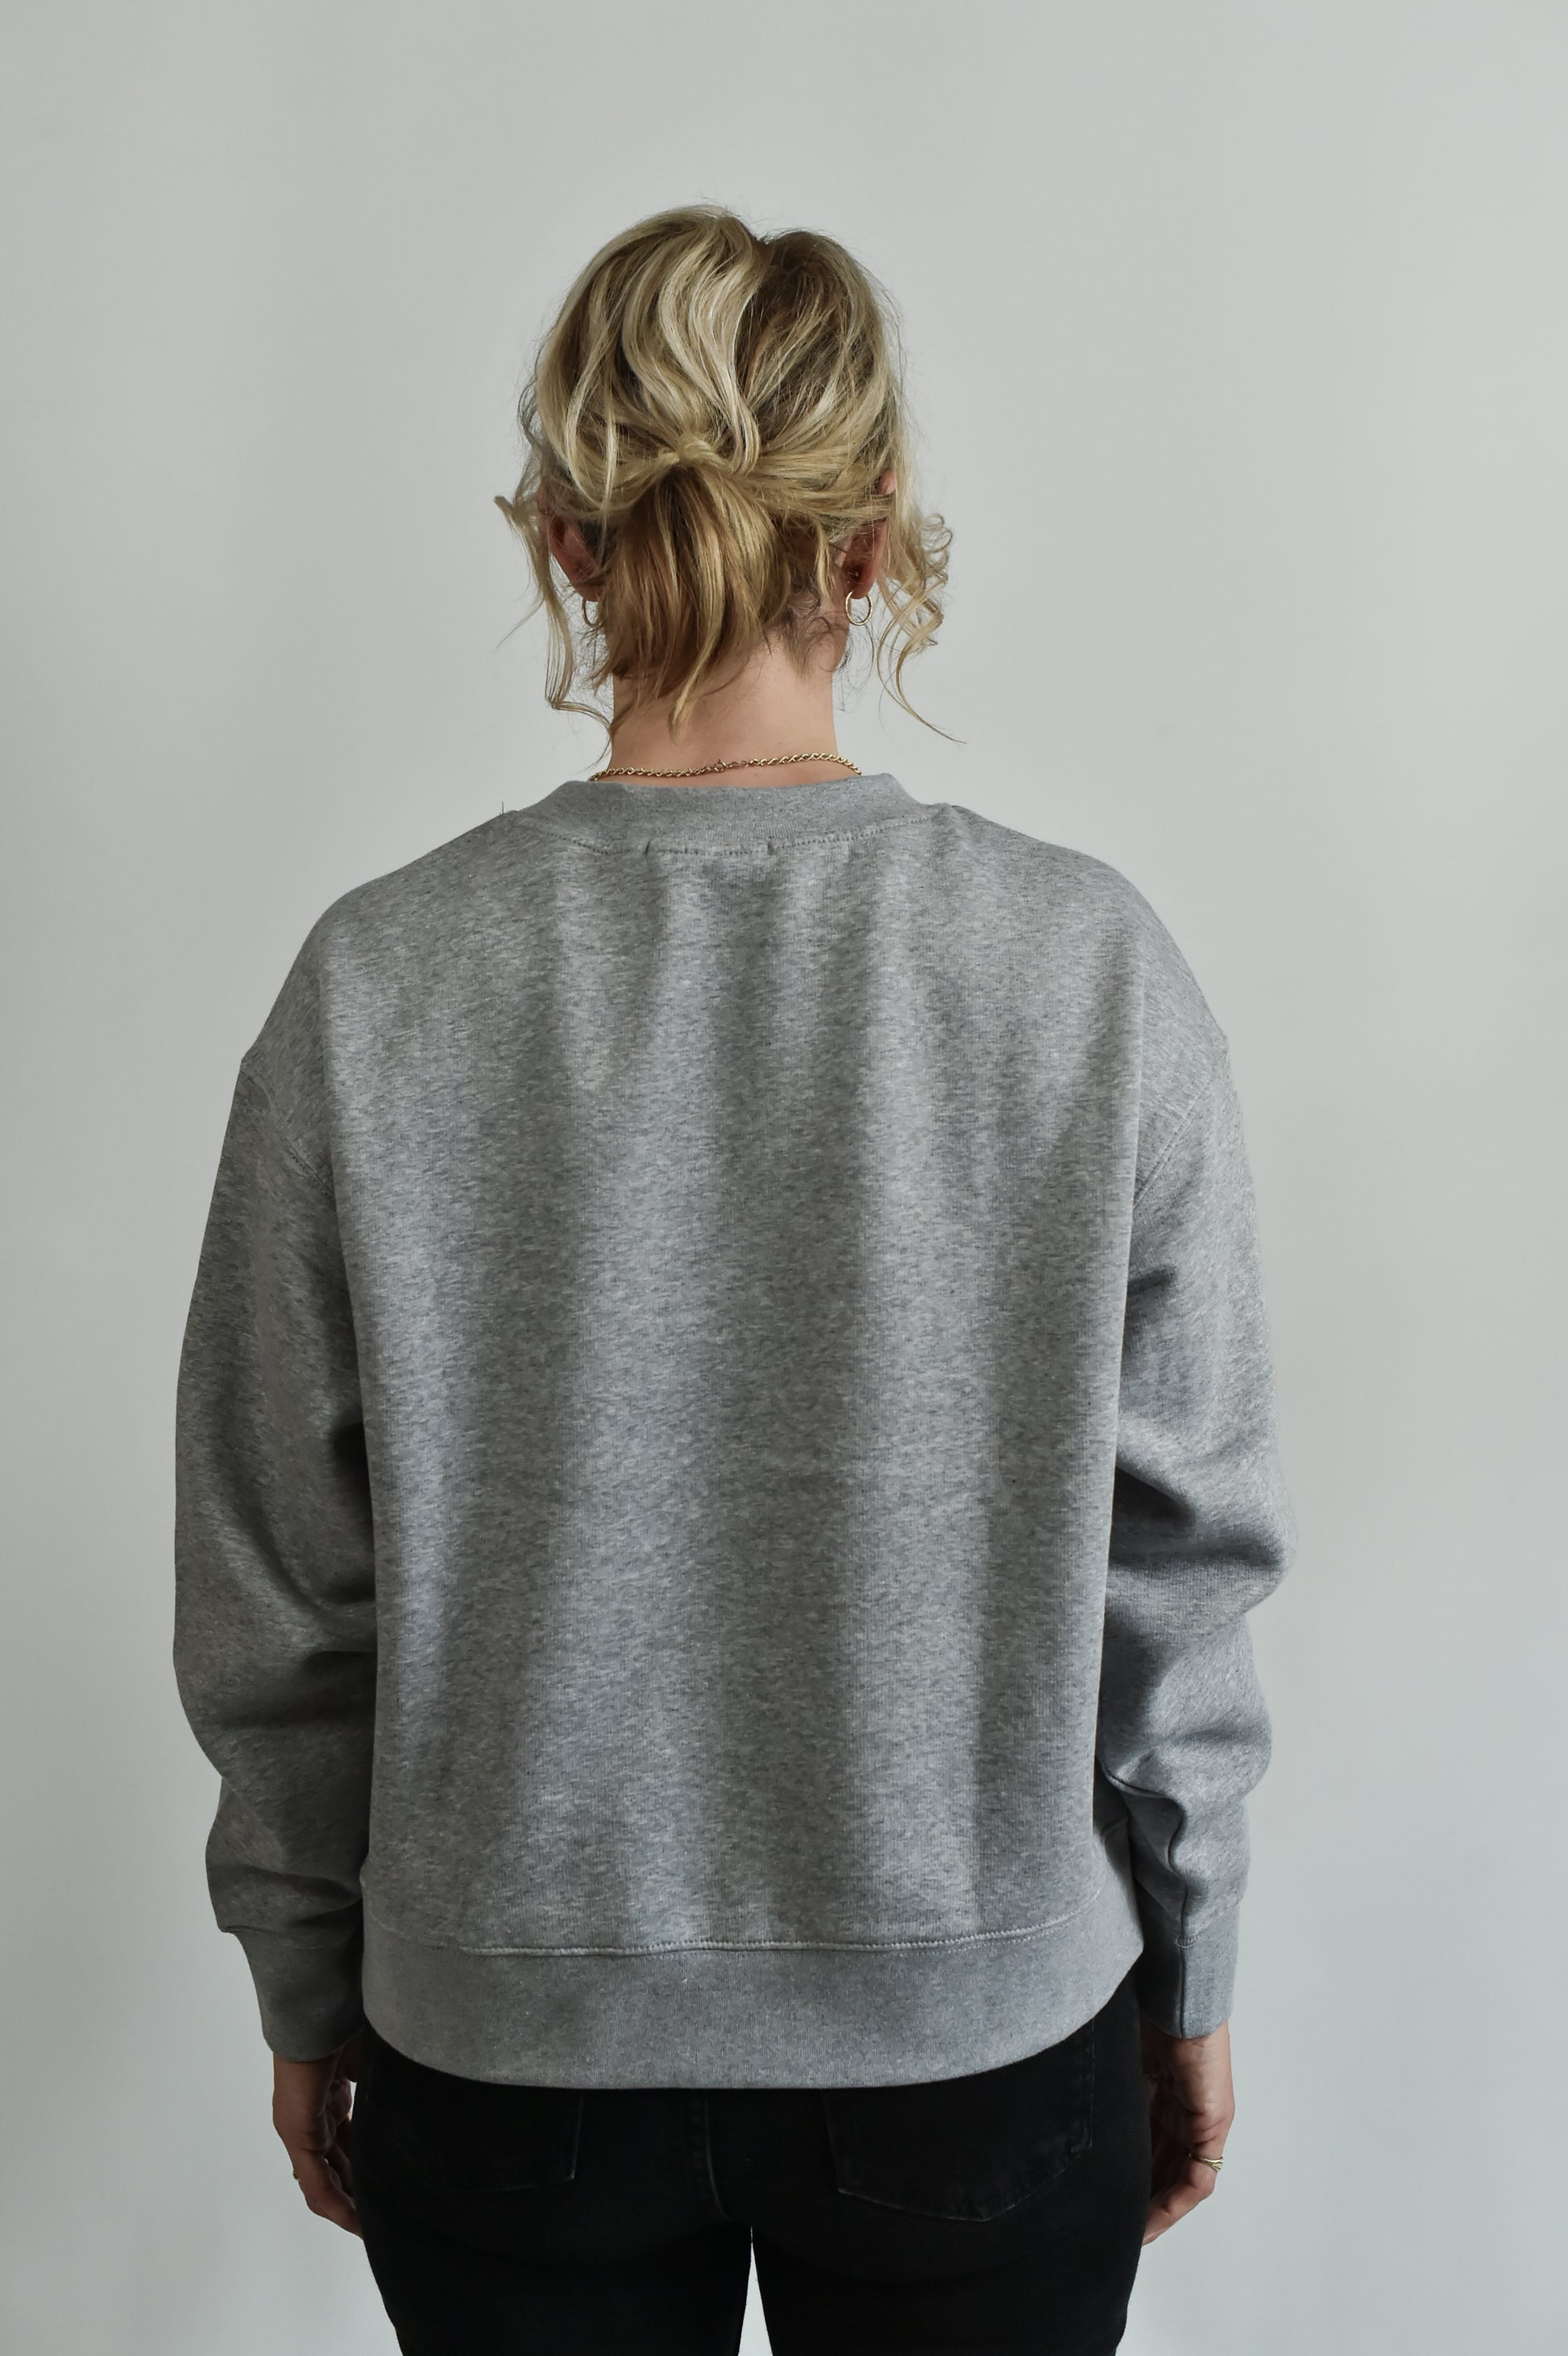 Grey sweatshirt with leopard embroidered star